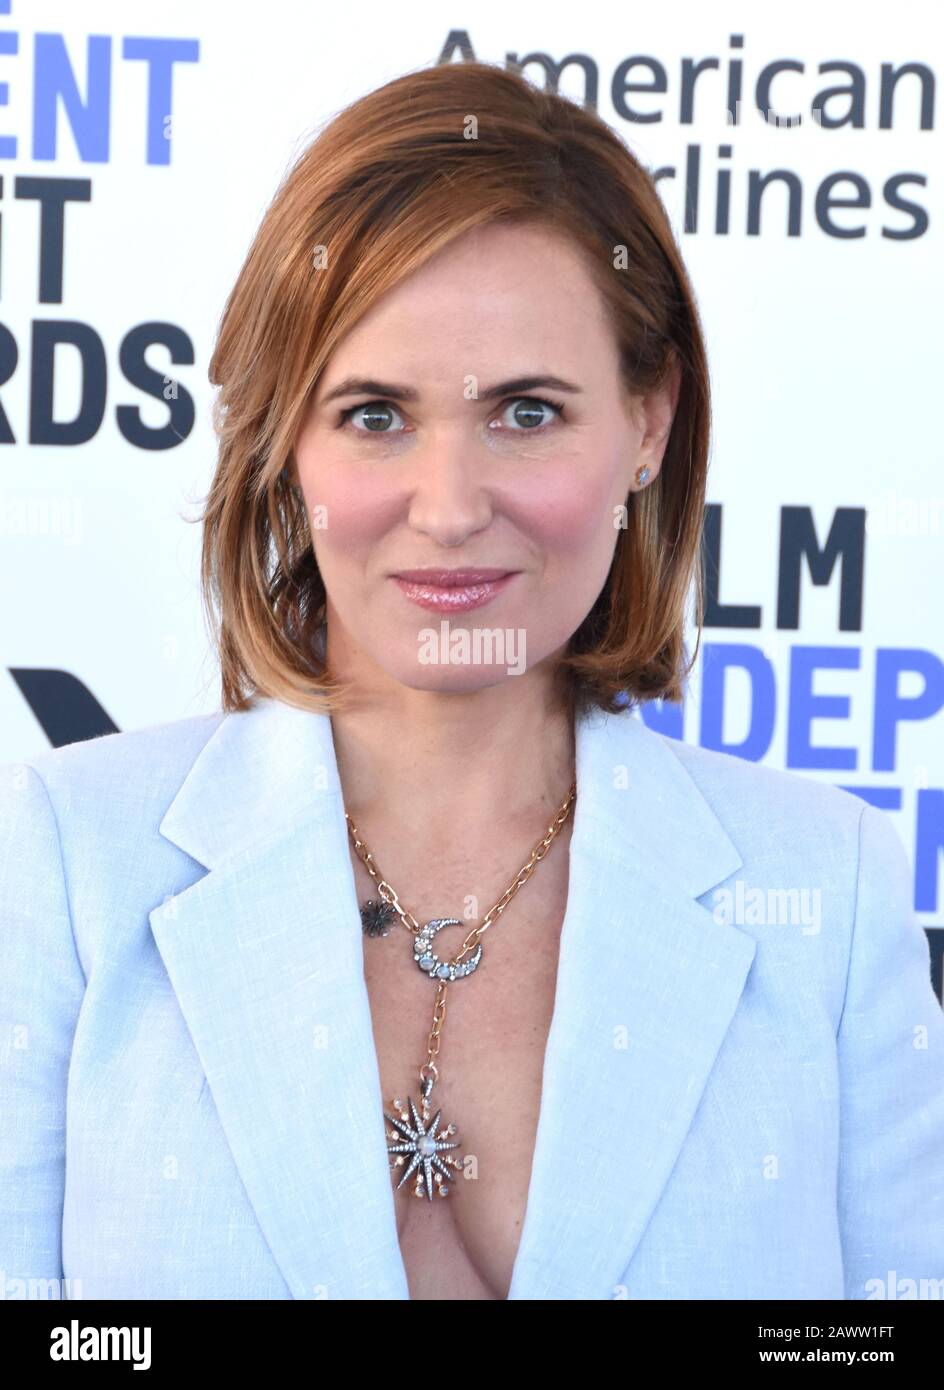 Santa Monica, California, USA 08th February 2020 Actress Judith Godreche attends the 2020 Film Independent Spirit Awards on February 08, 2020 in Santa Monica, California, USA. Photo by Barry King/Alamy Stock Photo Stock Photo